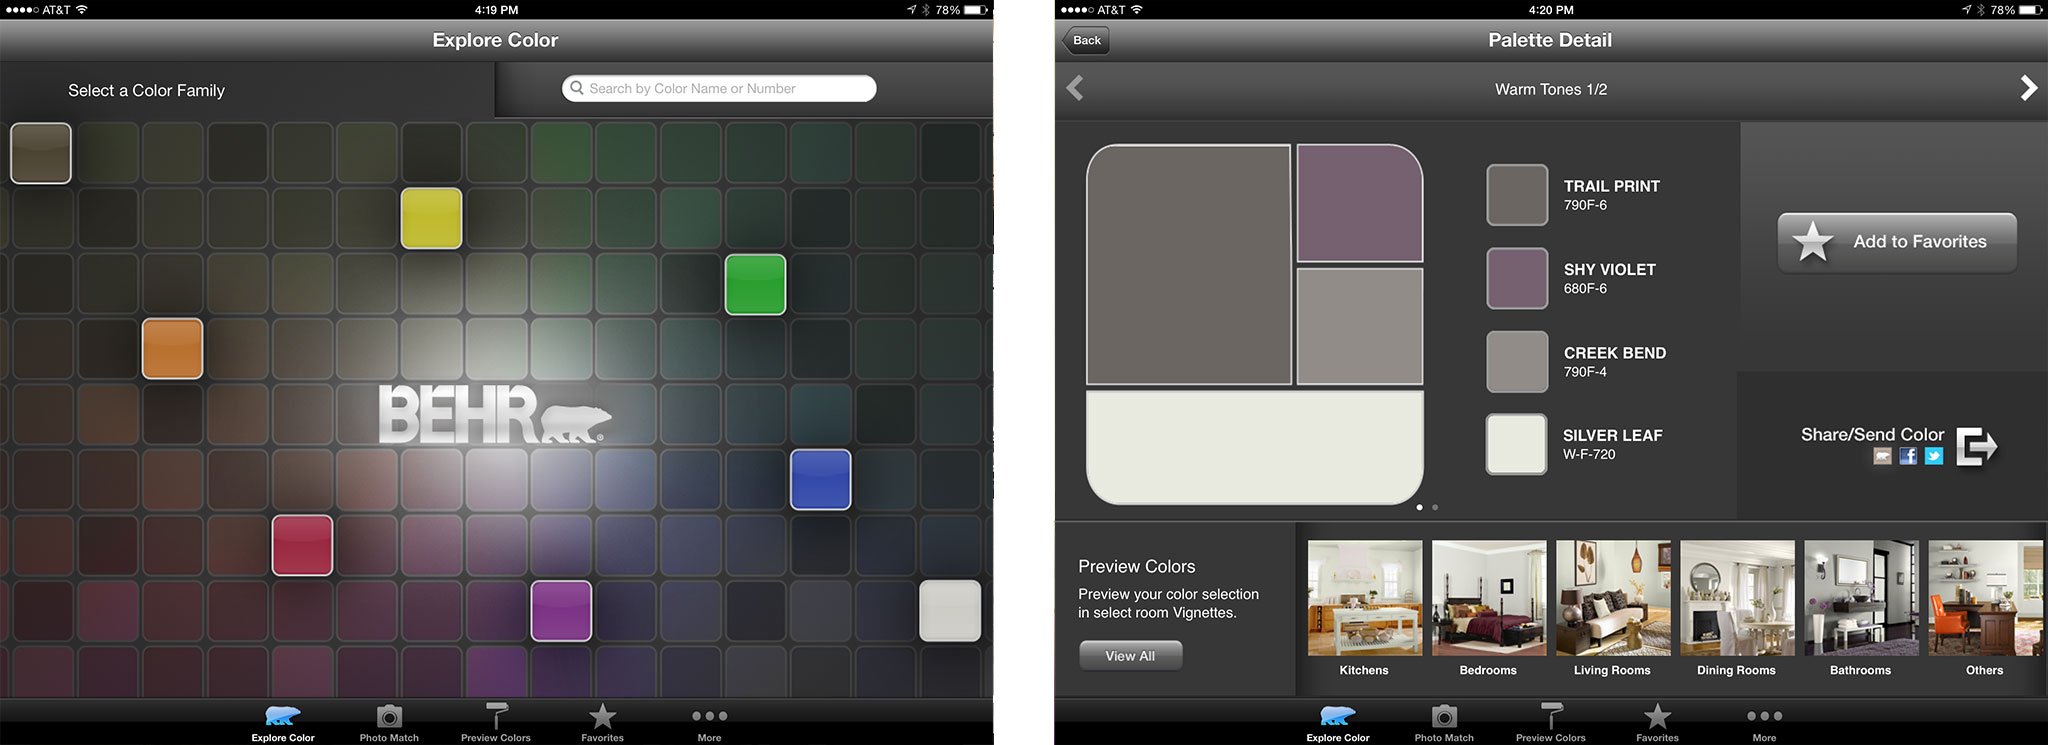 Best home design and improvement apps for iPad: ColorSmart by BEHR